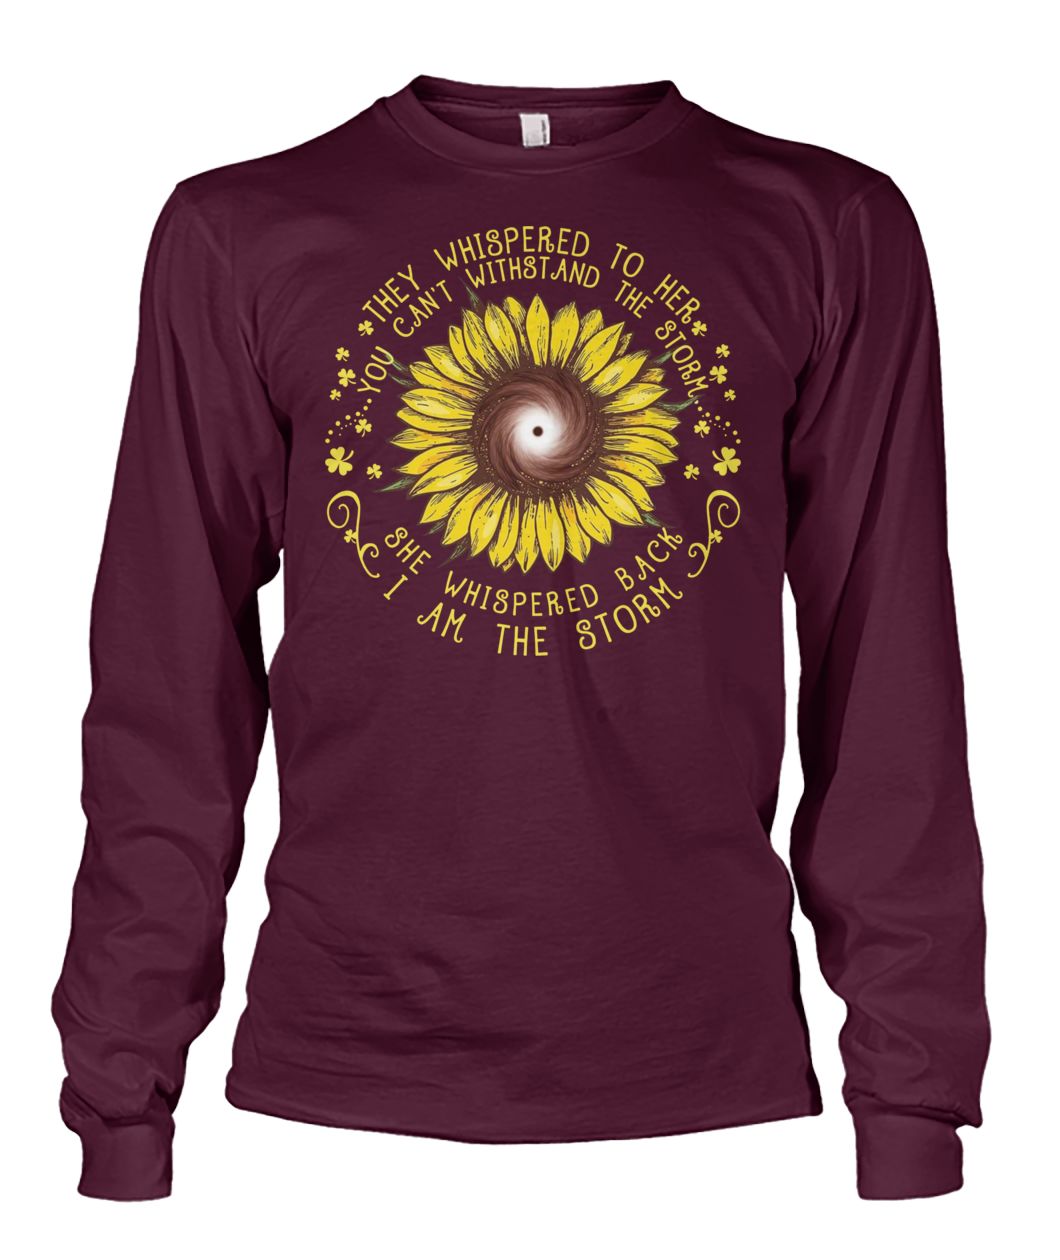 Sunflower they whispered to her you can't withstand the storm unisex long sleeve